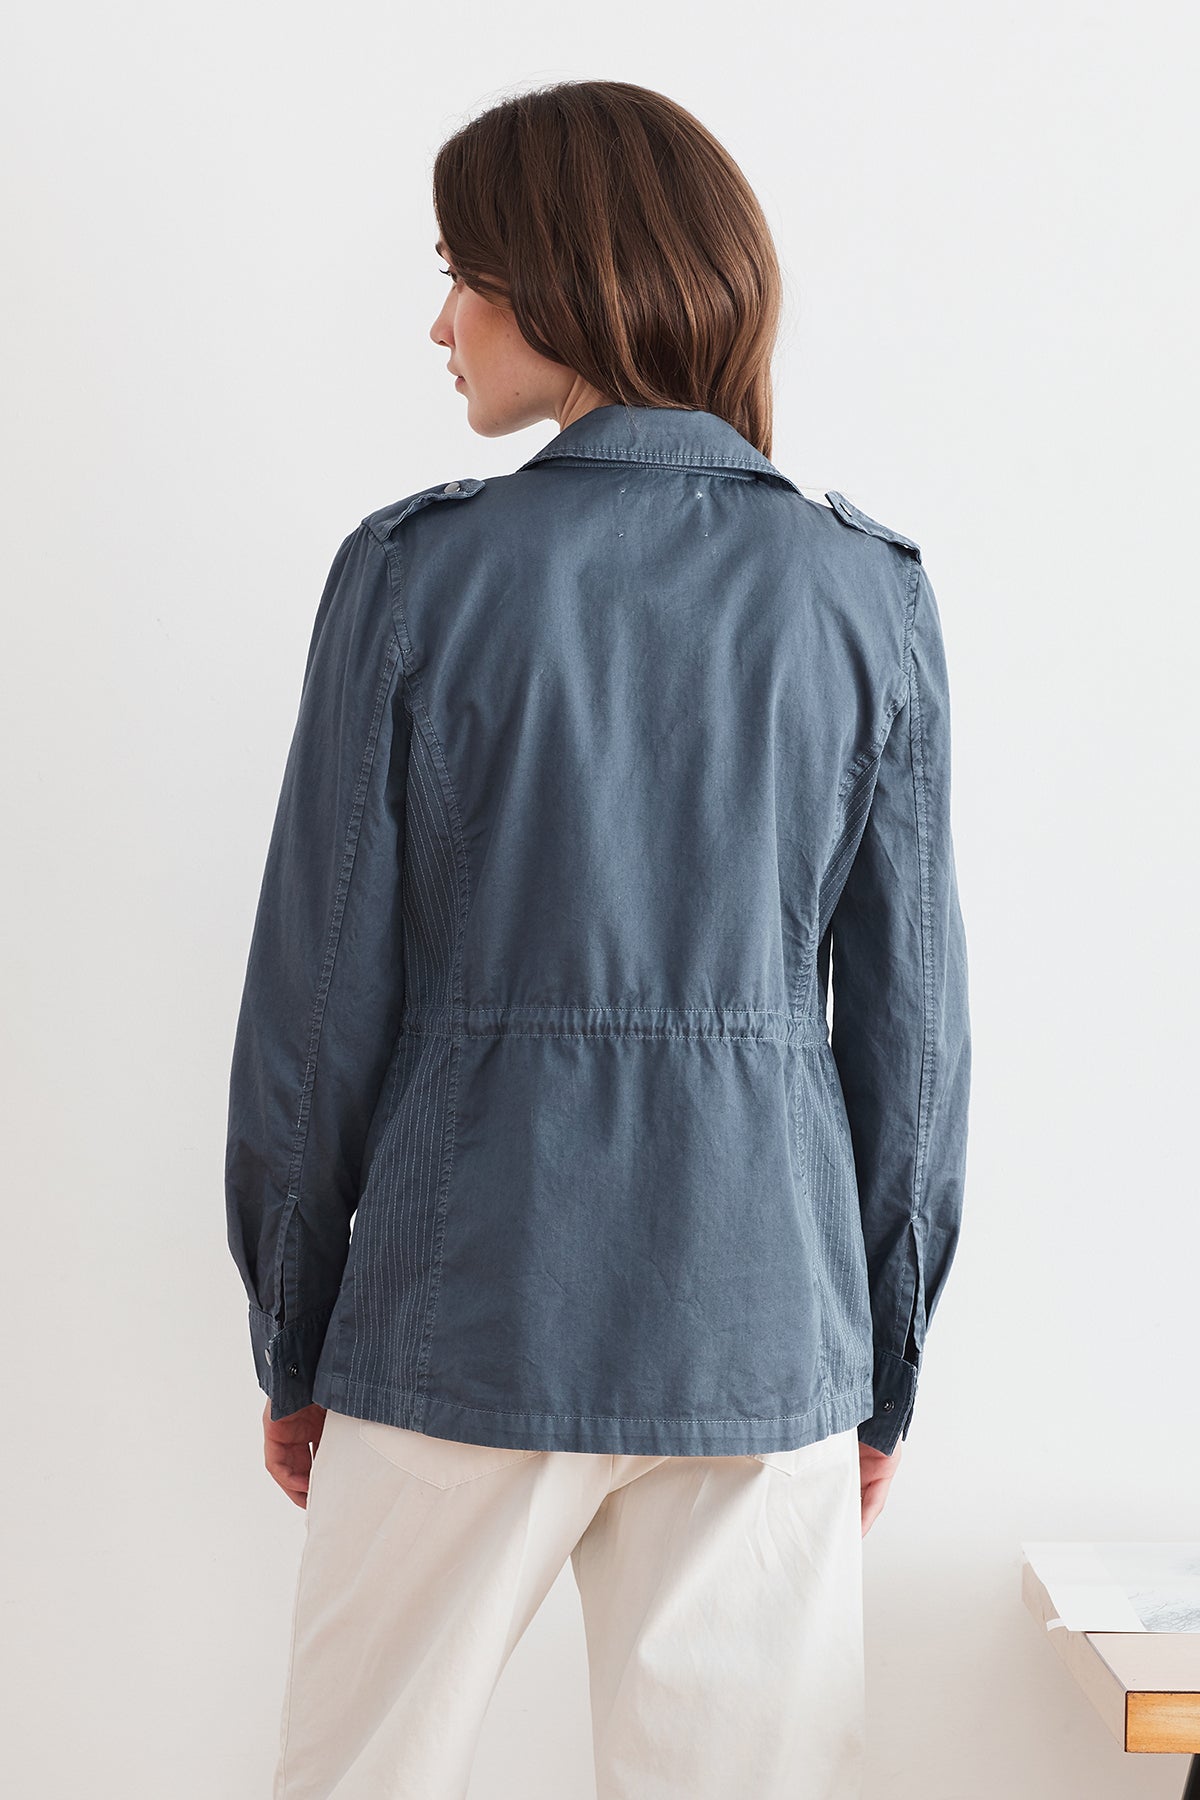   The back view of a woman wearing the Velvet by Graham & Spencer RUBY LIGHT-WEIGHT ARMY JACKET. 